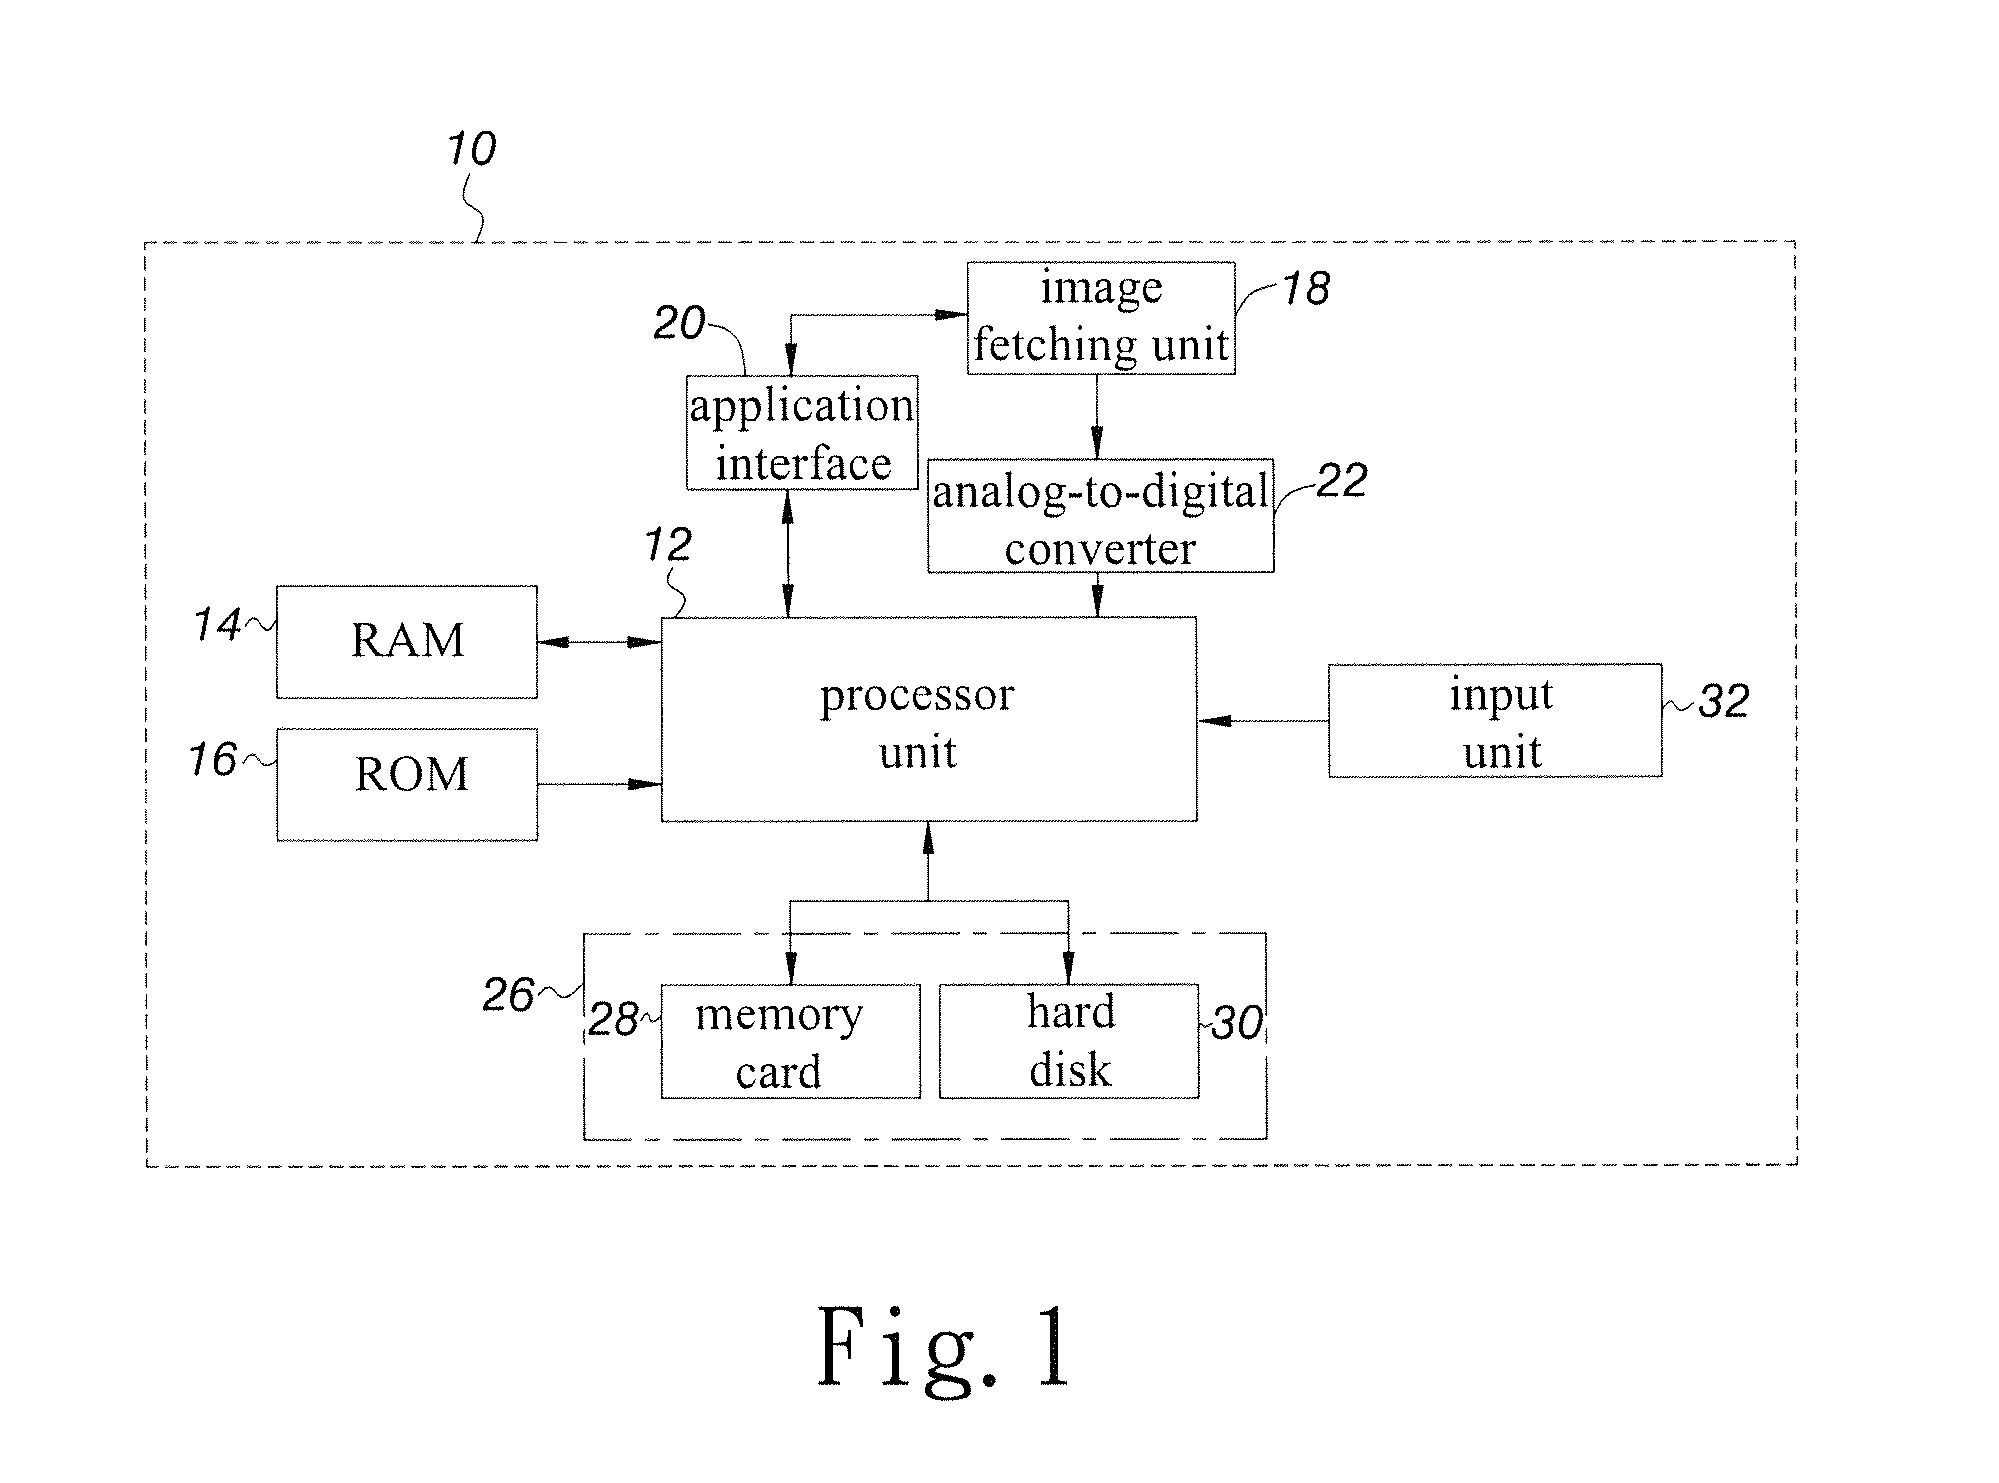 Automatic record detection device and method for stop arm violation event